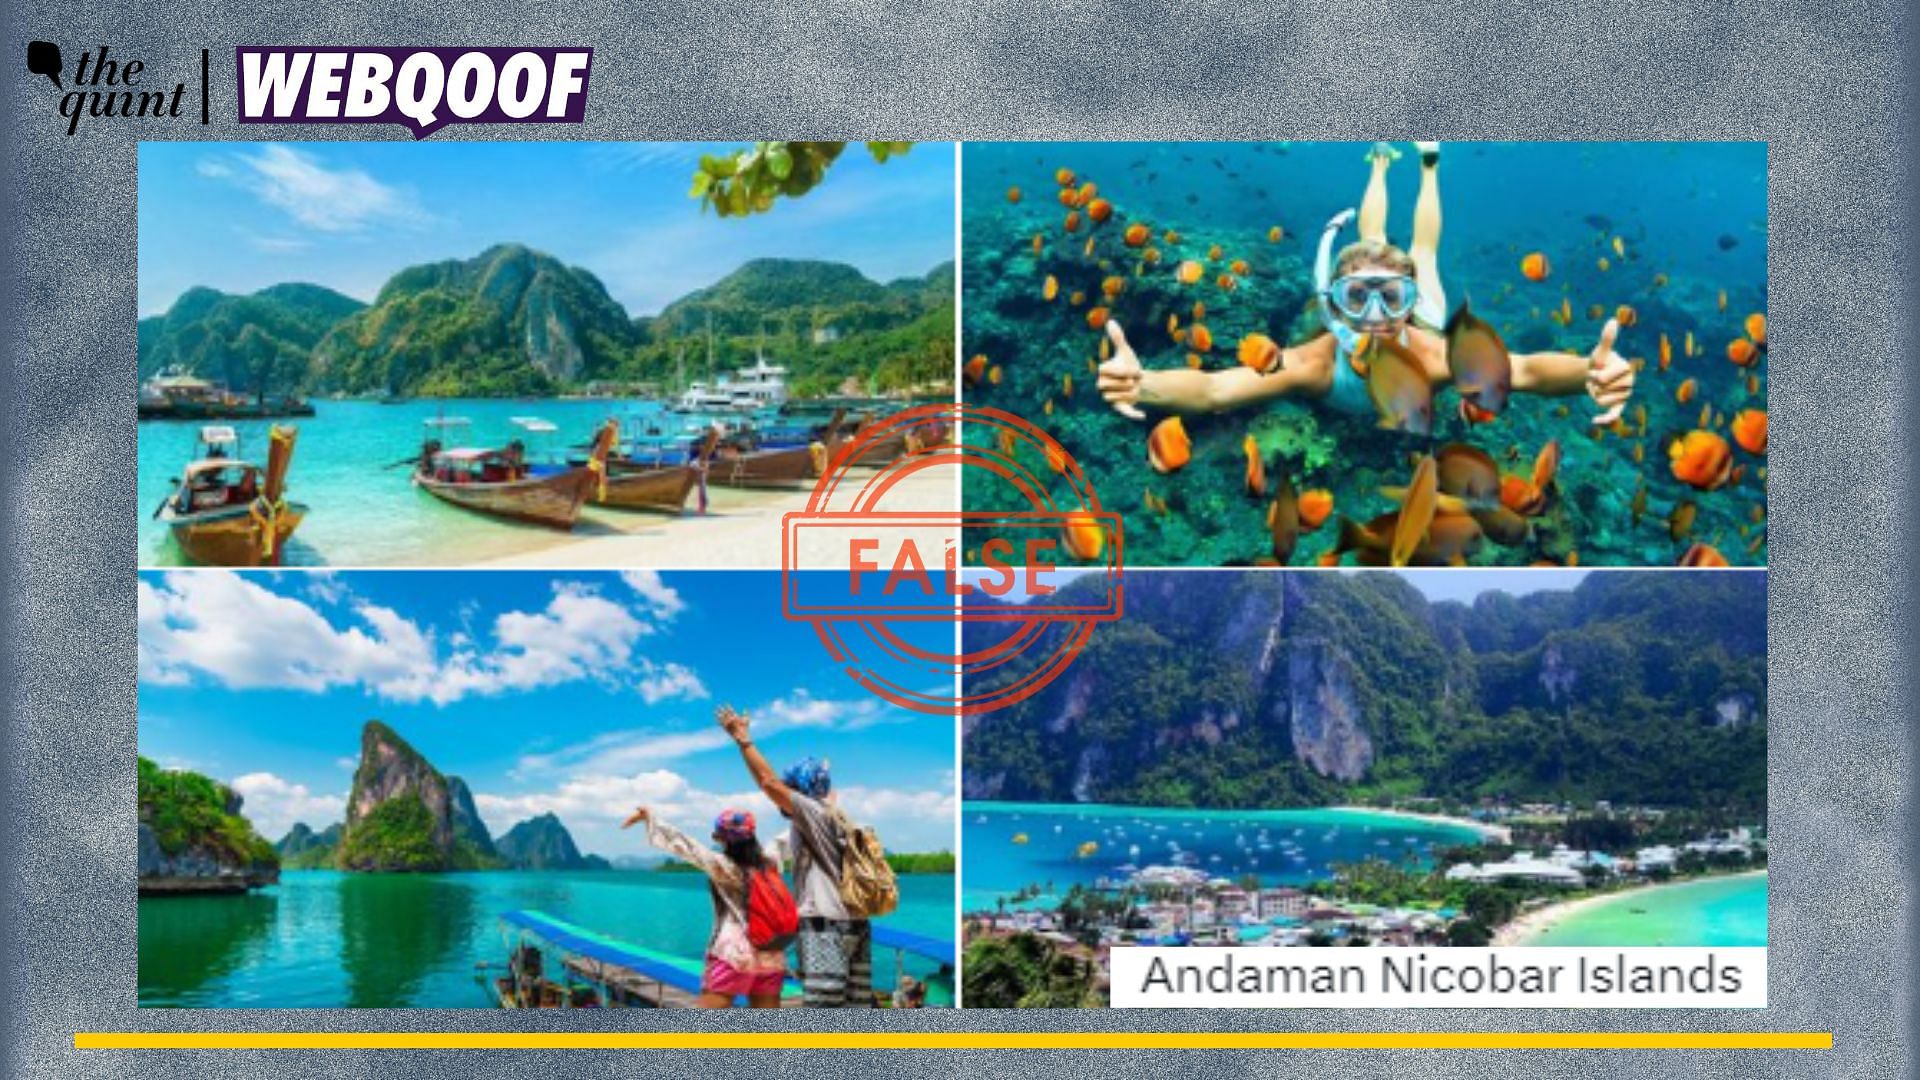 Fact-Check: Unrelated Images Falsely Linked to Andaman & Nicobar Islands